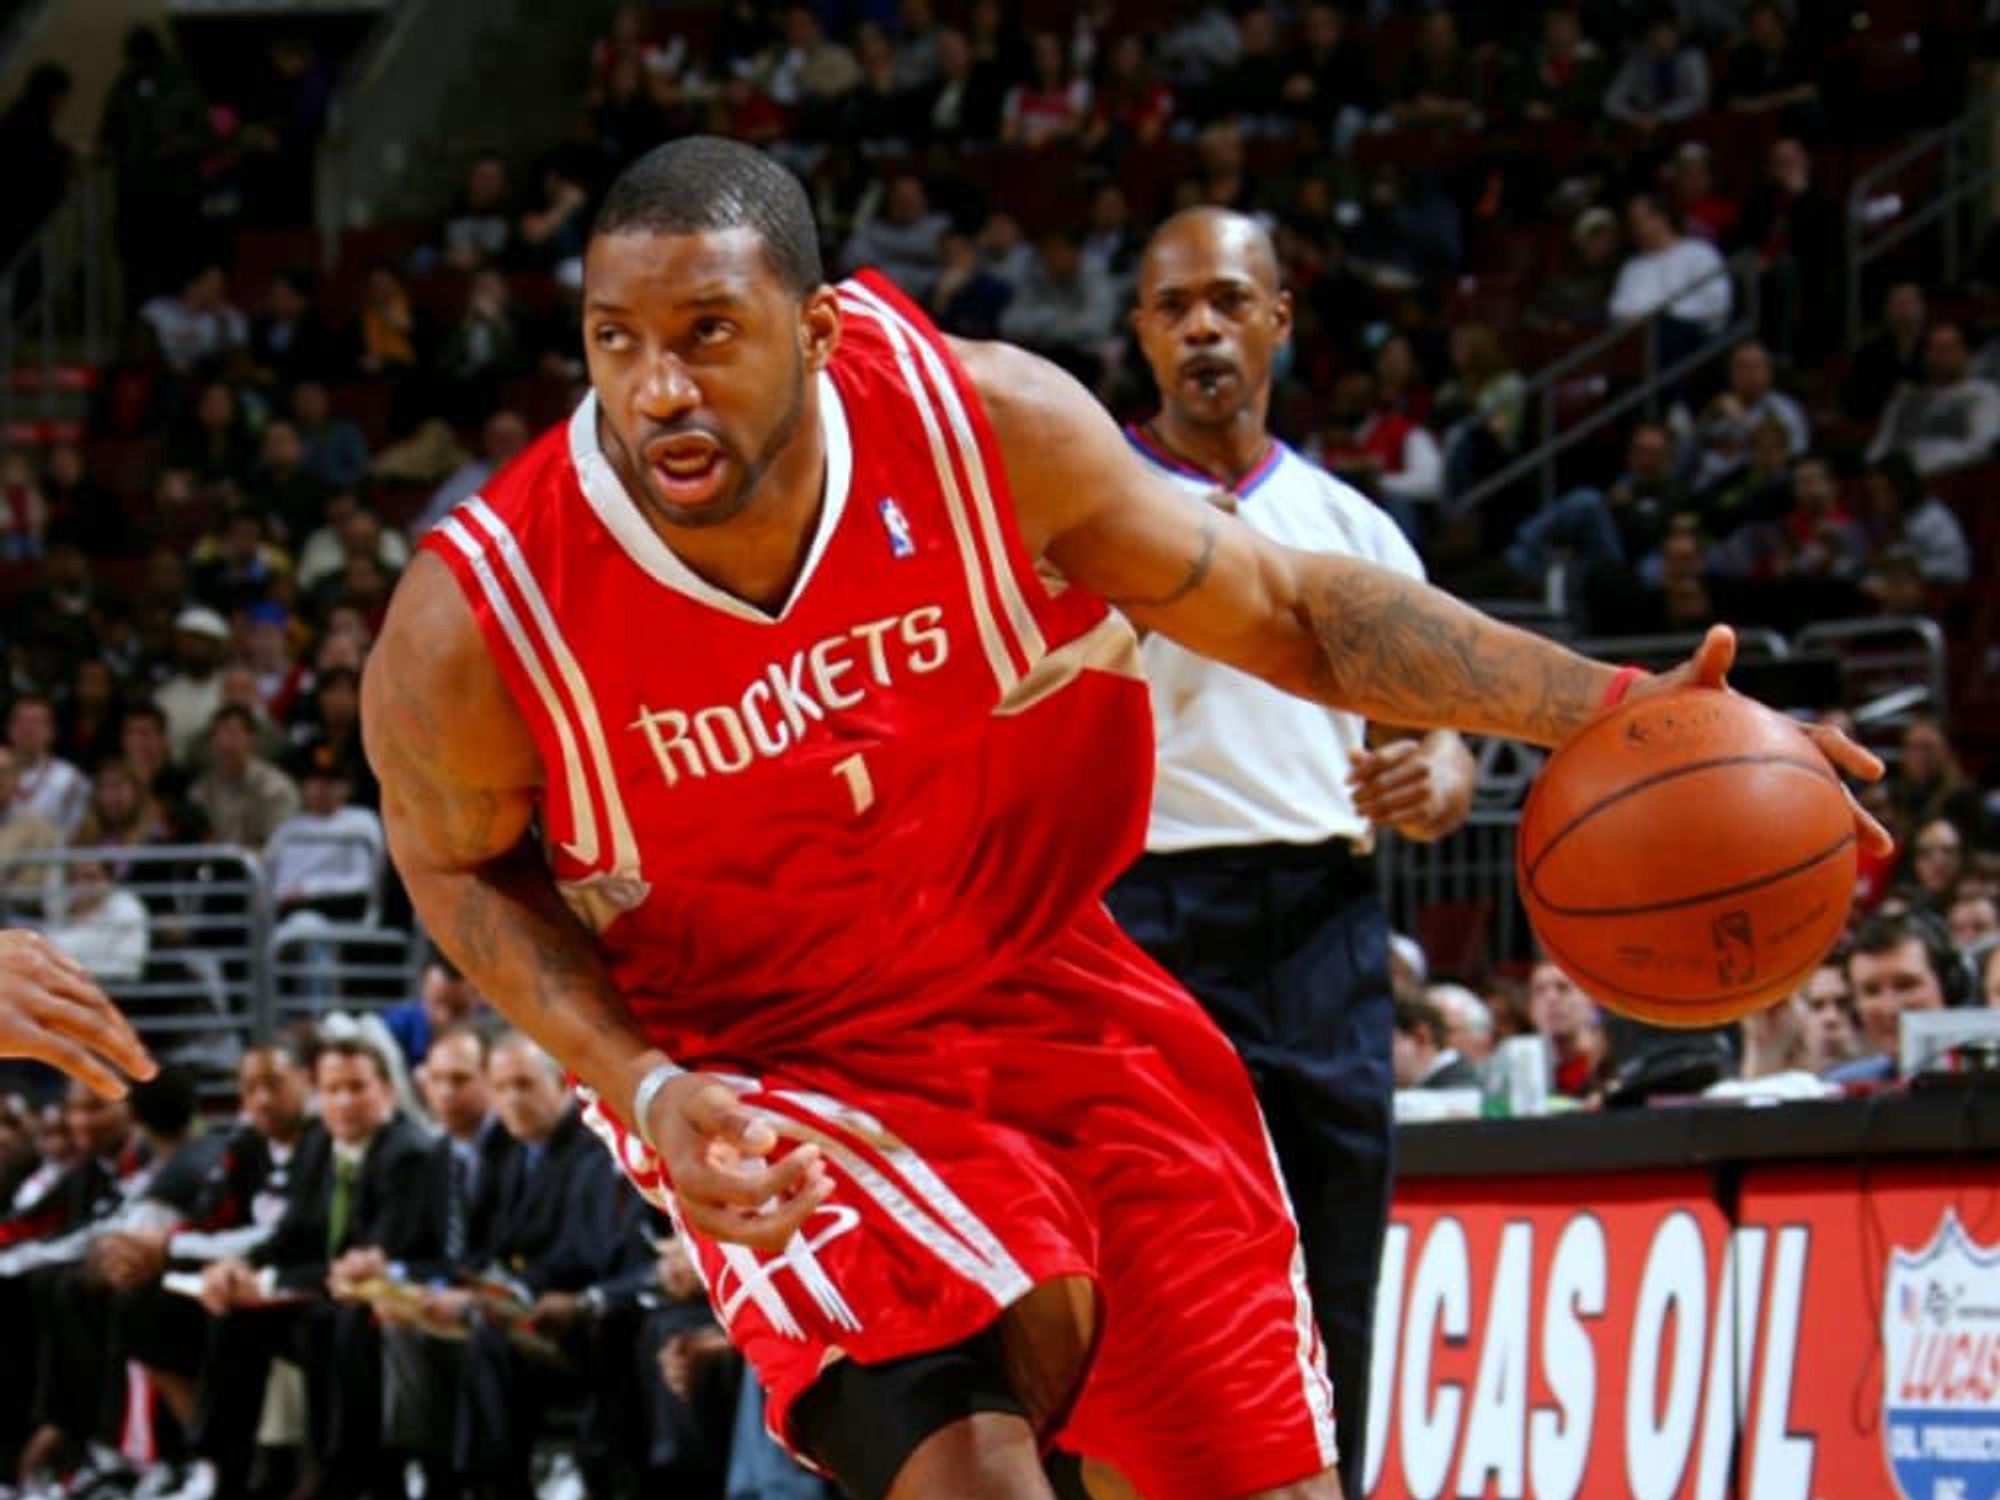 Top 10 Rockets Trades of All-Time: #4 - Tracy McGrady - The Dream